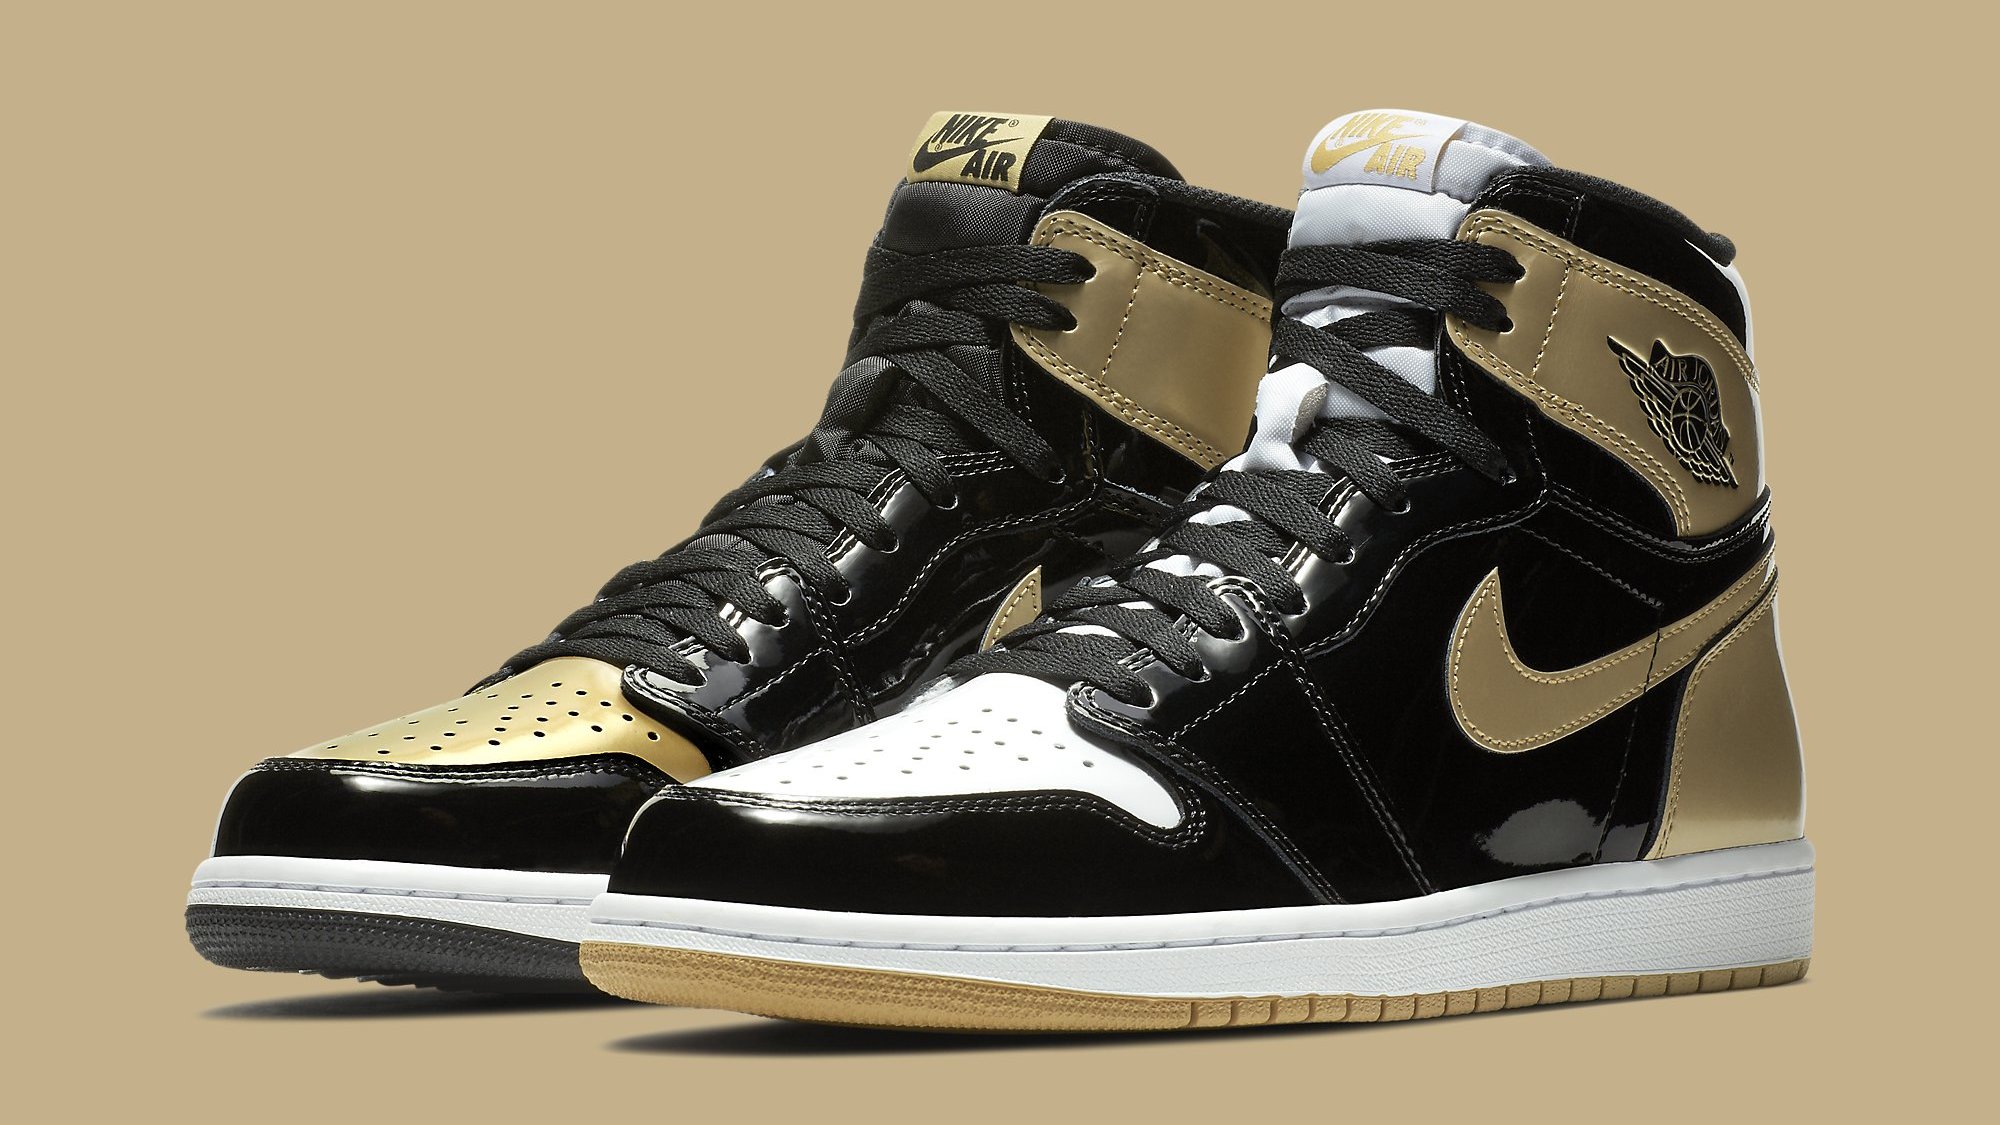 Where 3 Gold' Air Jordan 1s Releasing on Cyber Monday |